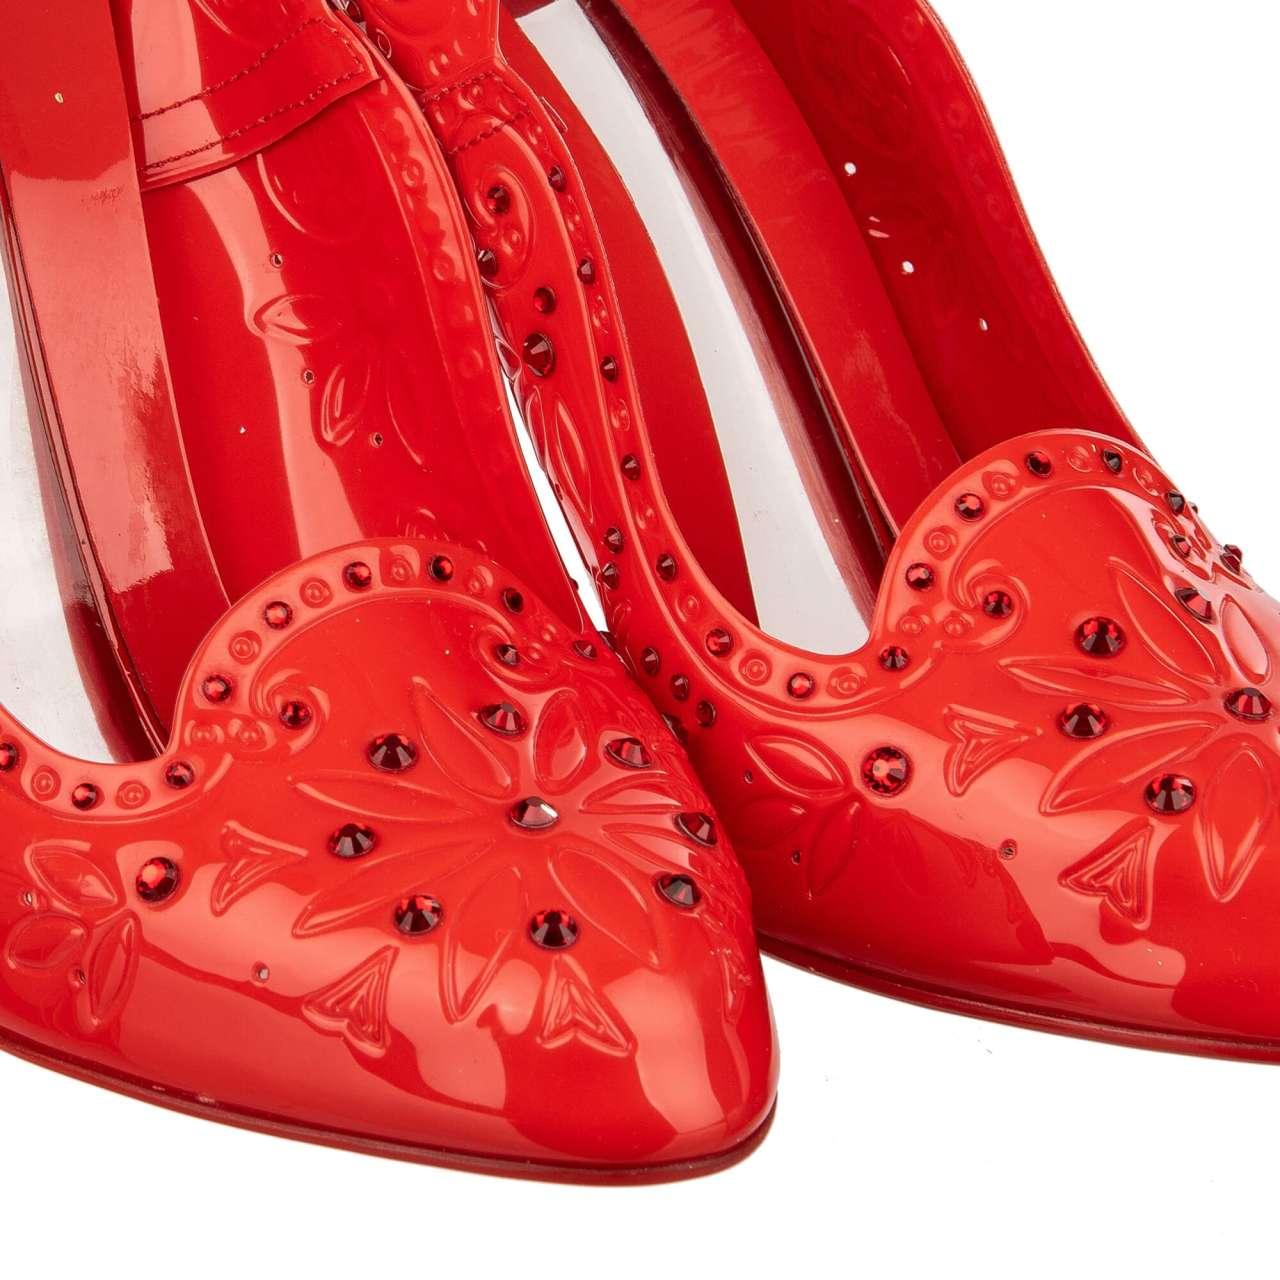 Dolce & Gabbana - Cinderella PVC Crystals Pumps Red 39 9 For Sale 2